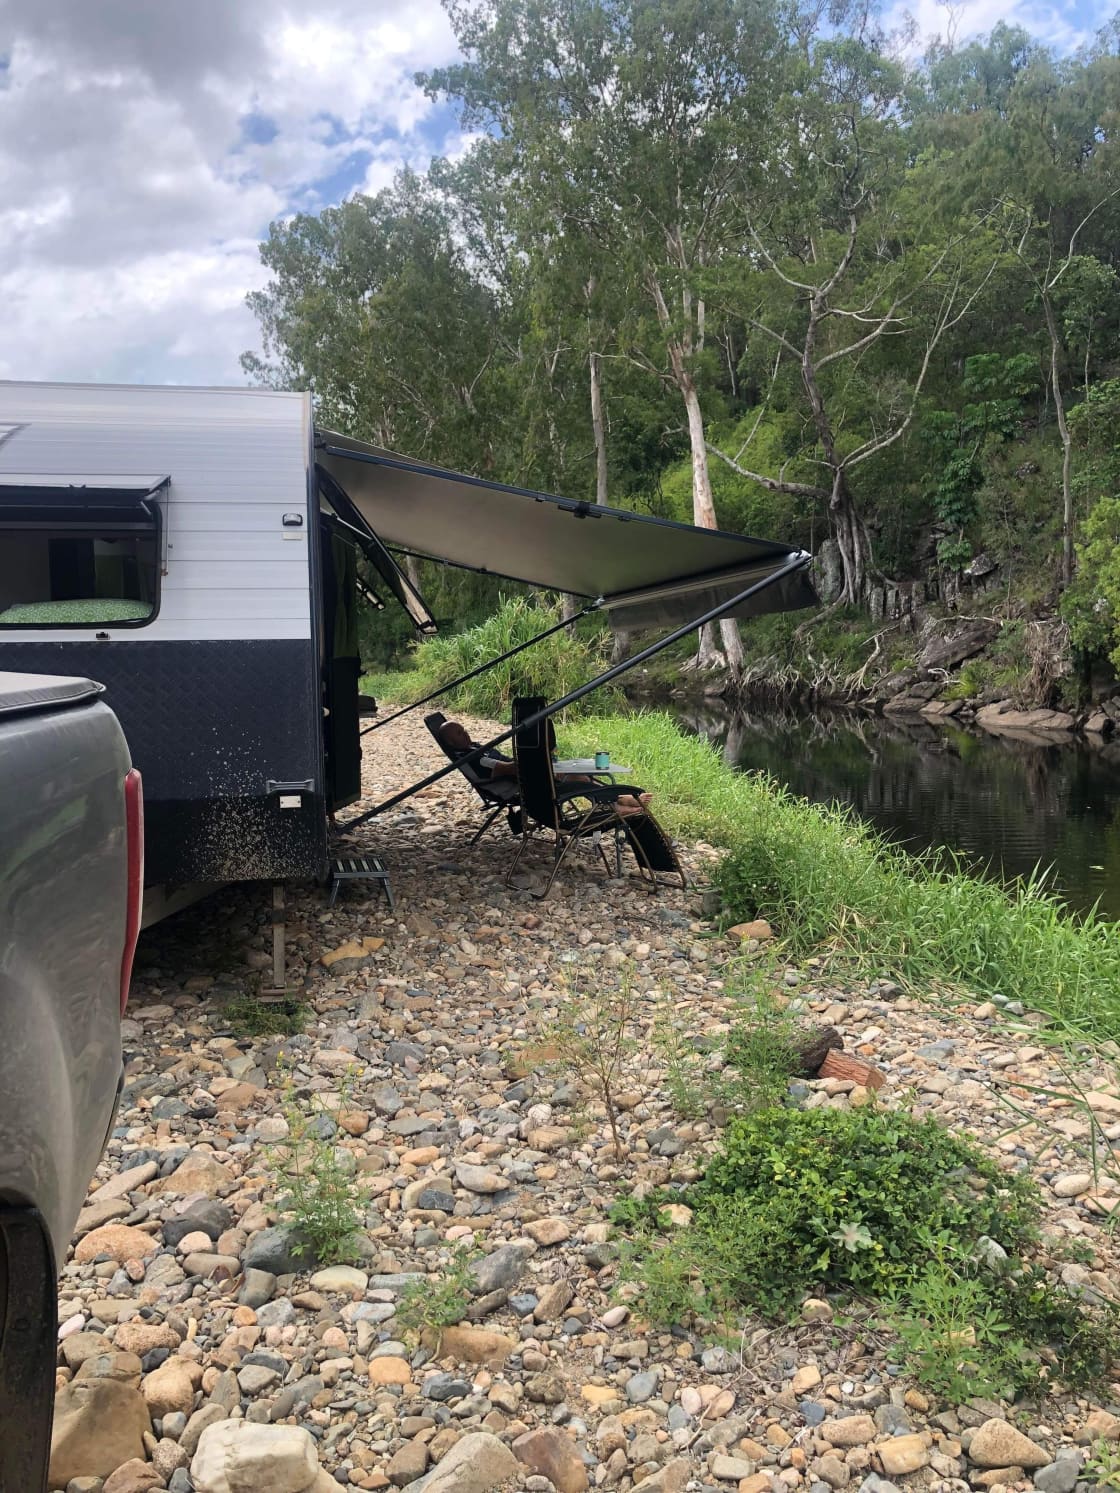 Creek and Antique Camping